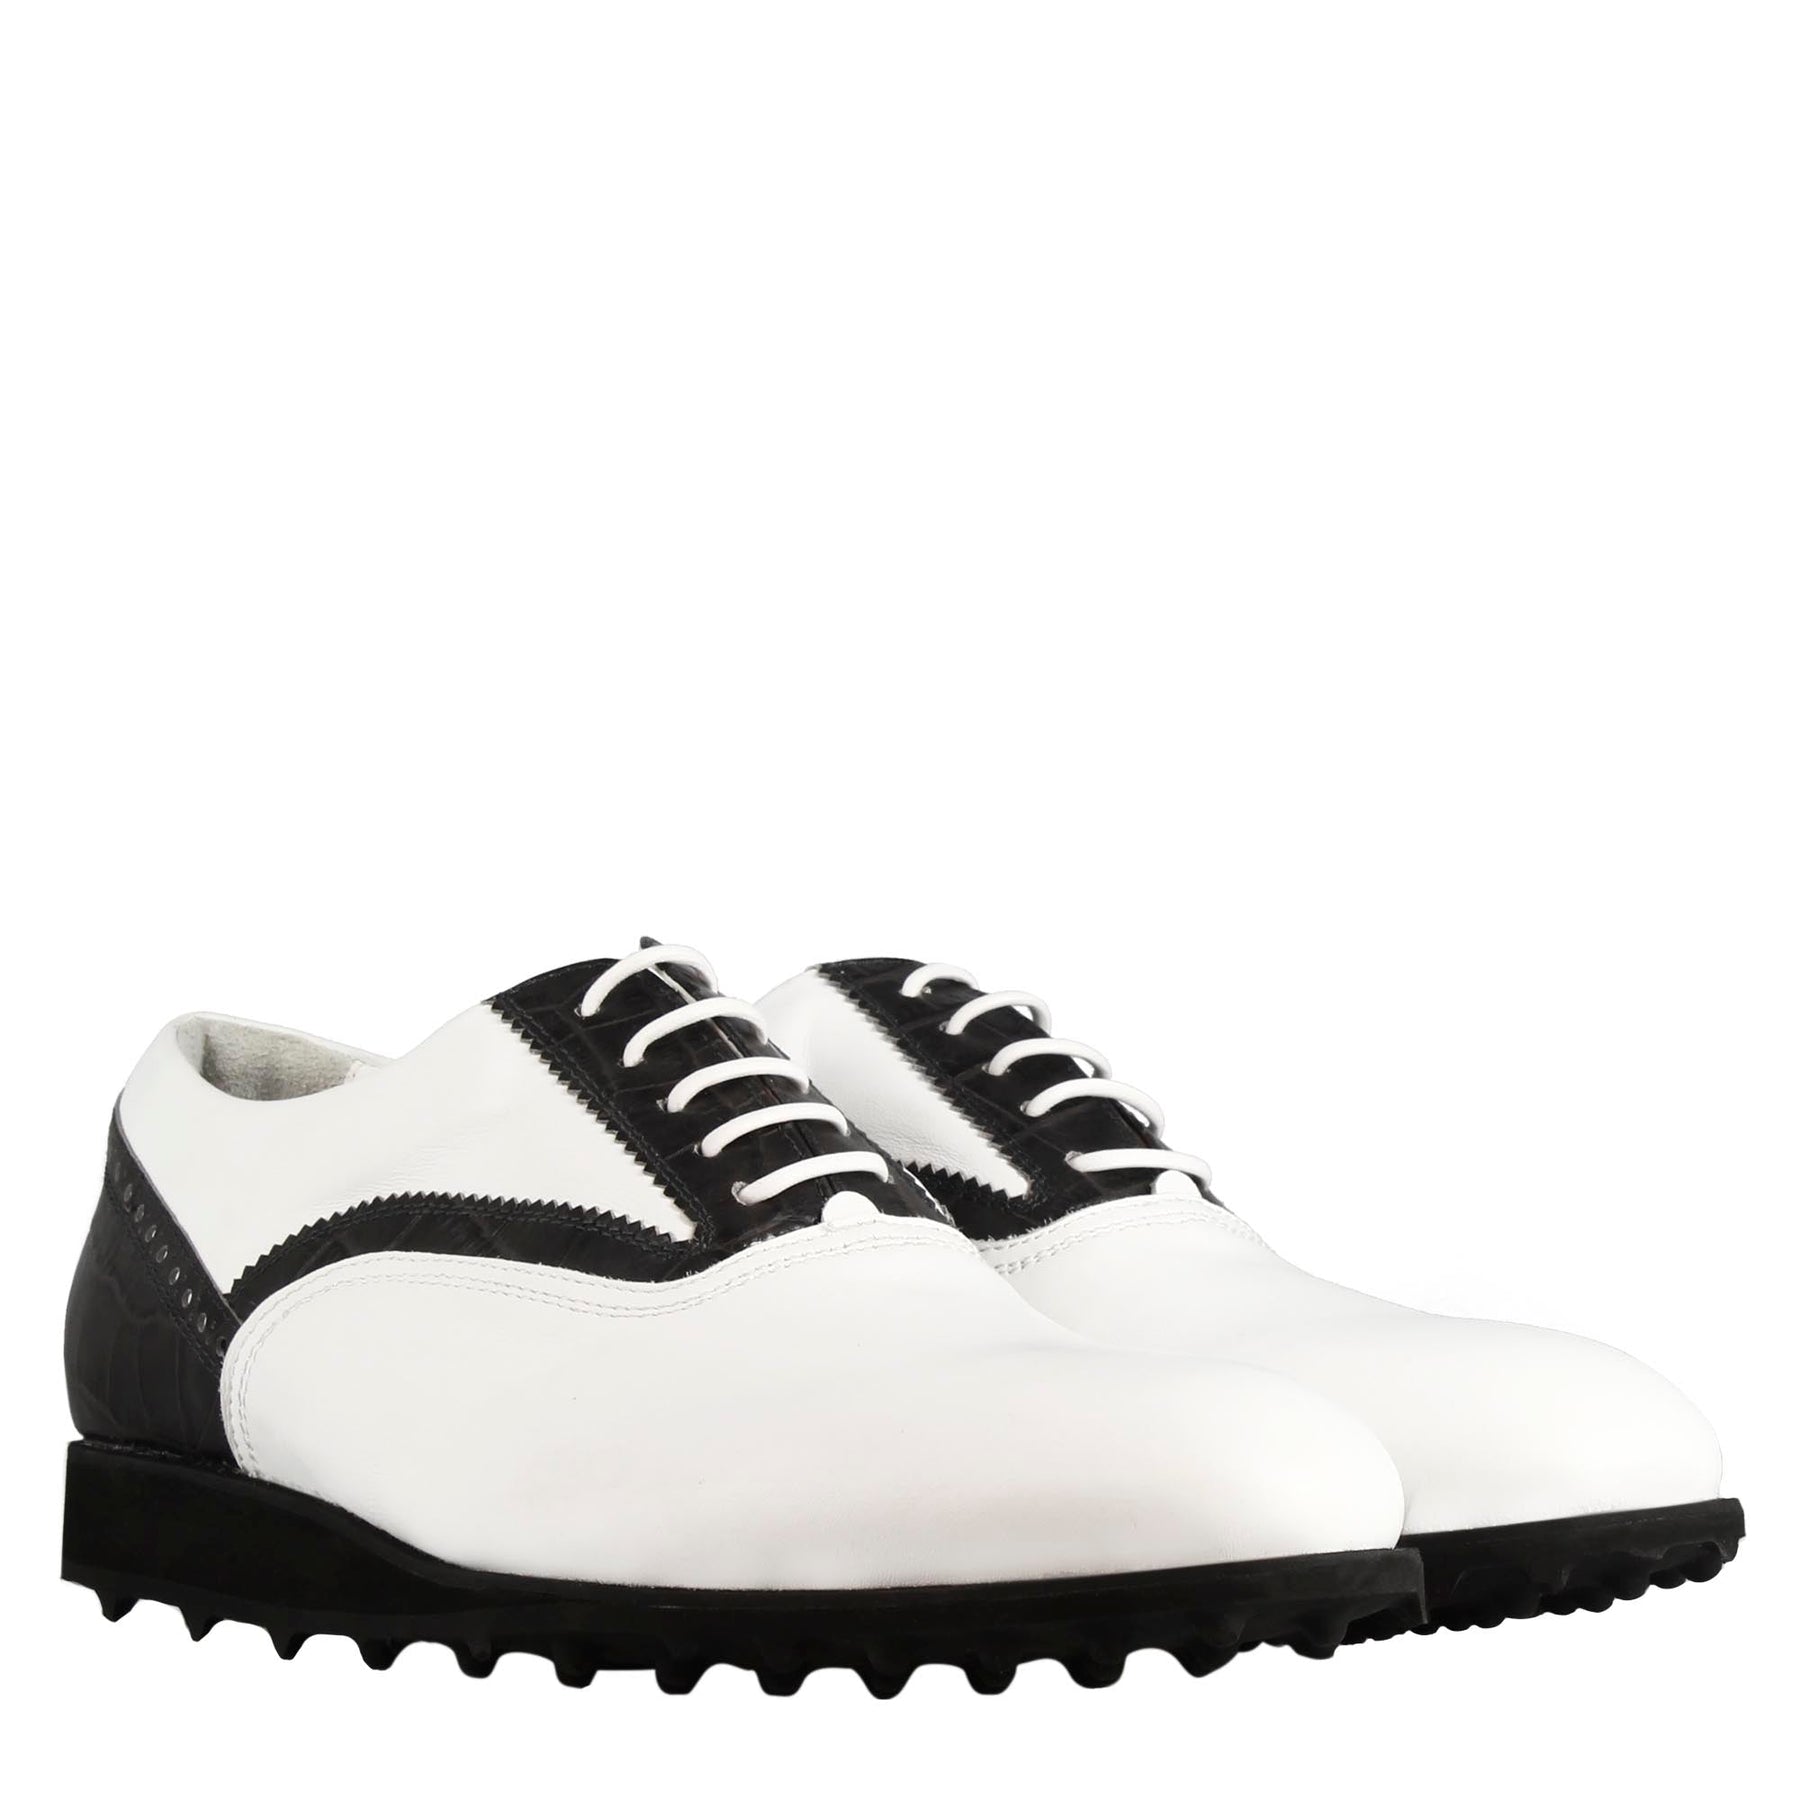 Handmade men's golf shoe in white leather with black details